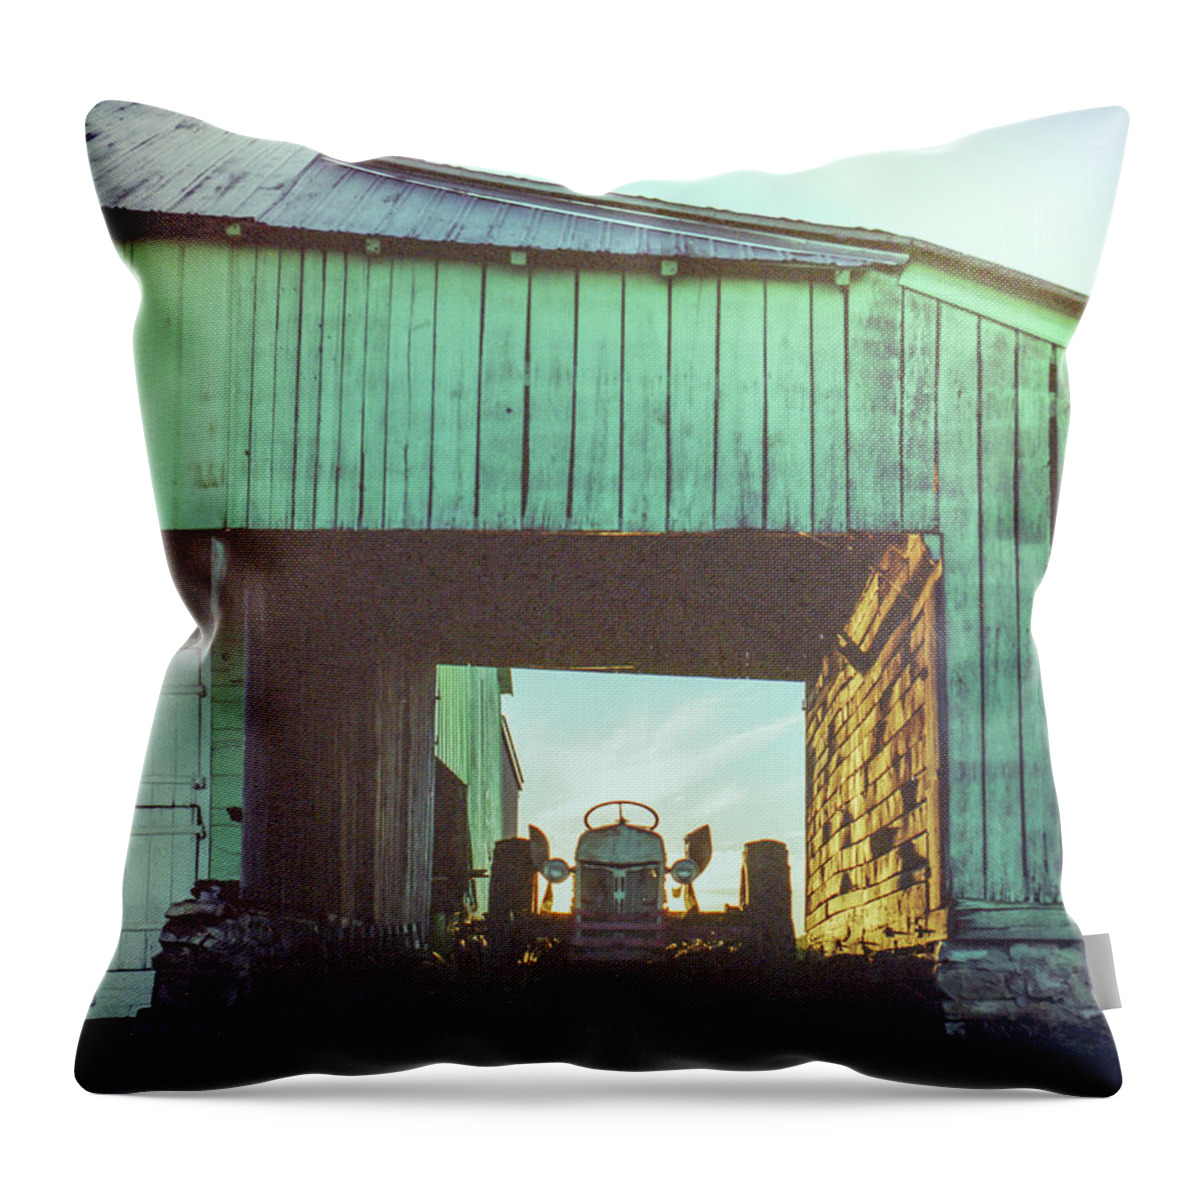 Tractor Barn Throw Pillow featuring the photograph Barn by John Daly